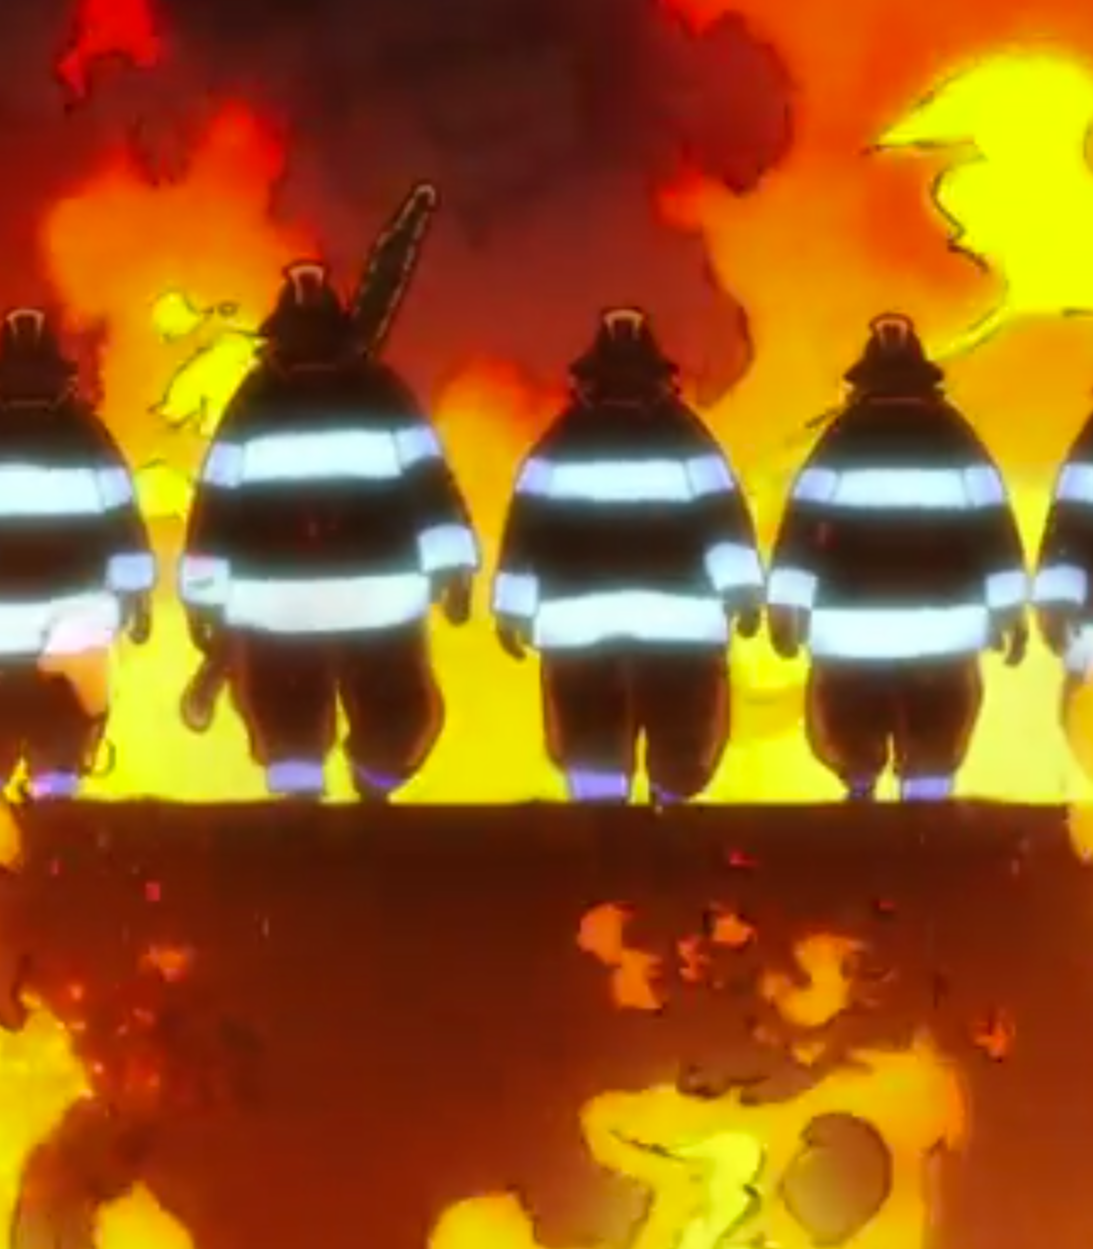 Fire Force 1093